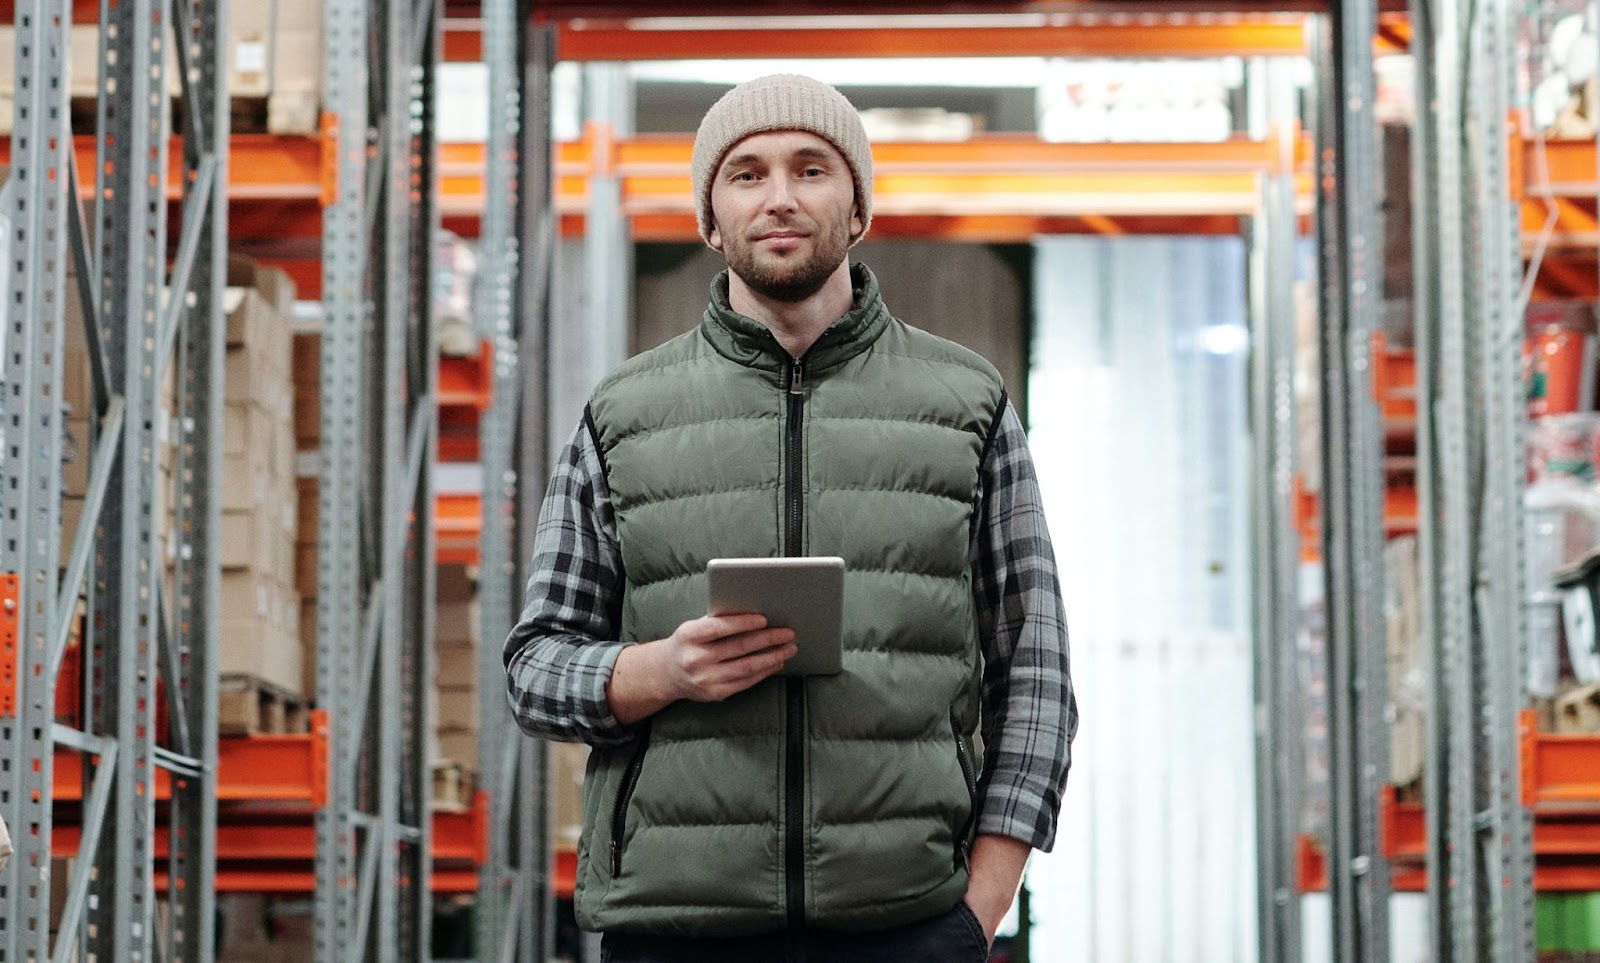 A confident worker thinks about automation in grocery stores, holding a tablet computer and dressed appropriately for a walk-in freezer, stands in their supermarket's commissary warehouse, ready to guide a direct store delivery back to the distribution center.